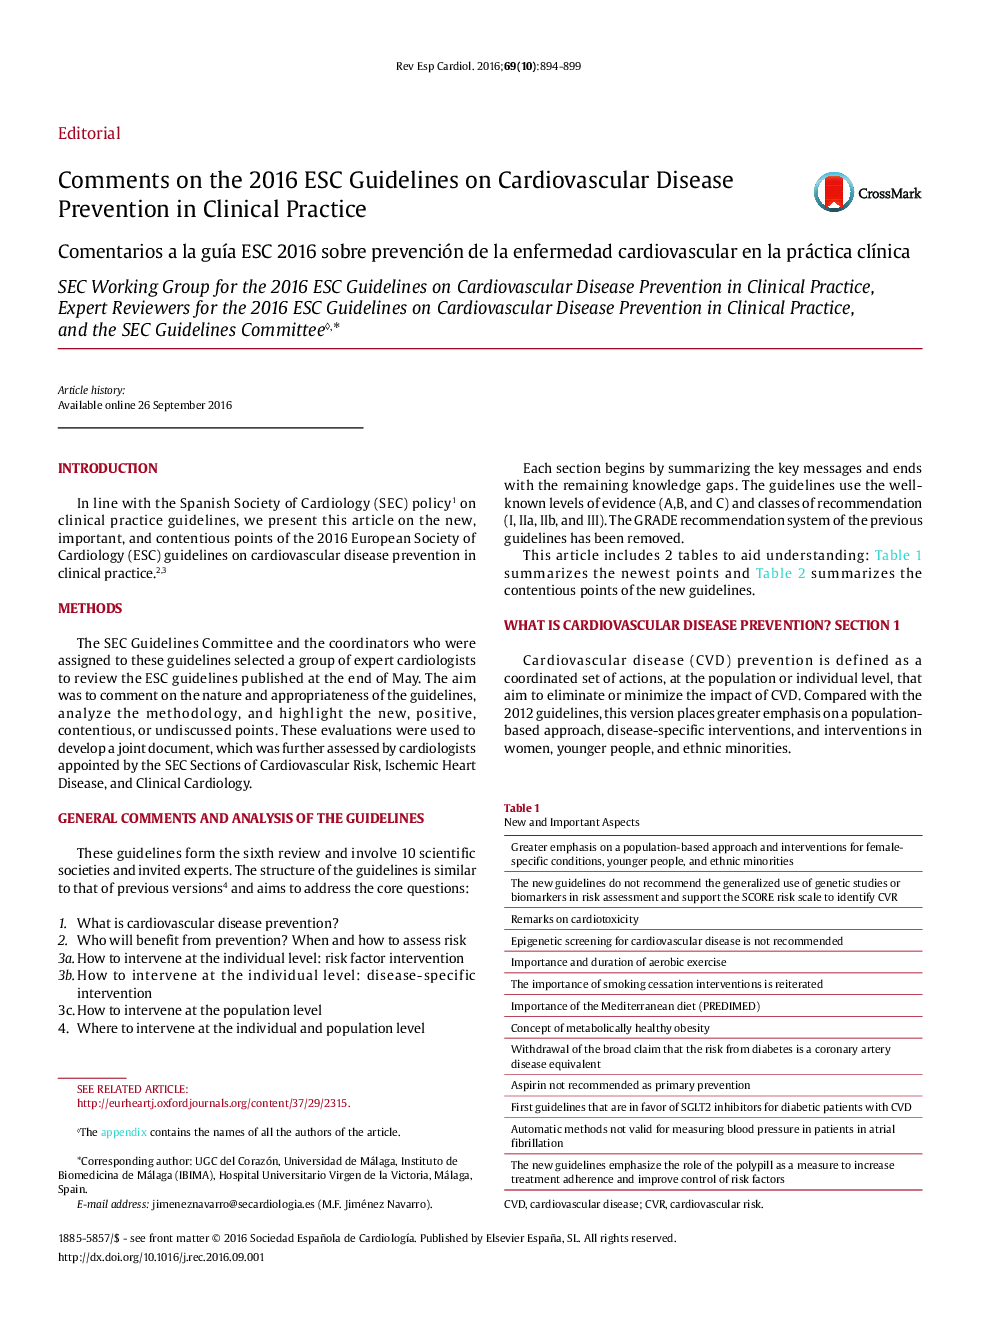 Comments on the 2016 ESC Guidelines on Cardiovascular Disease Prevention in Clinical Practice